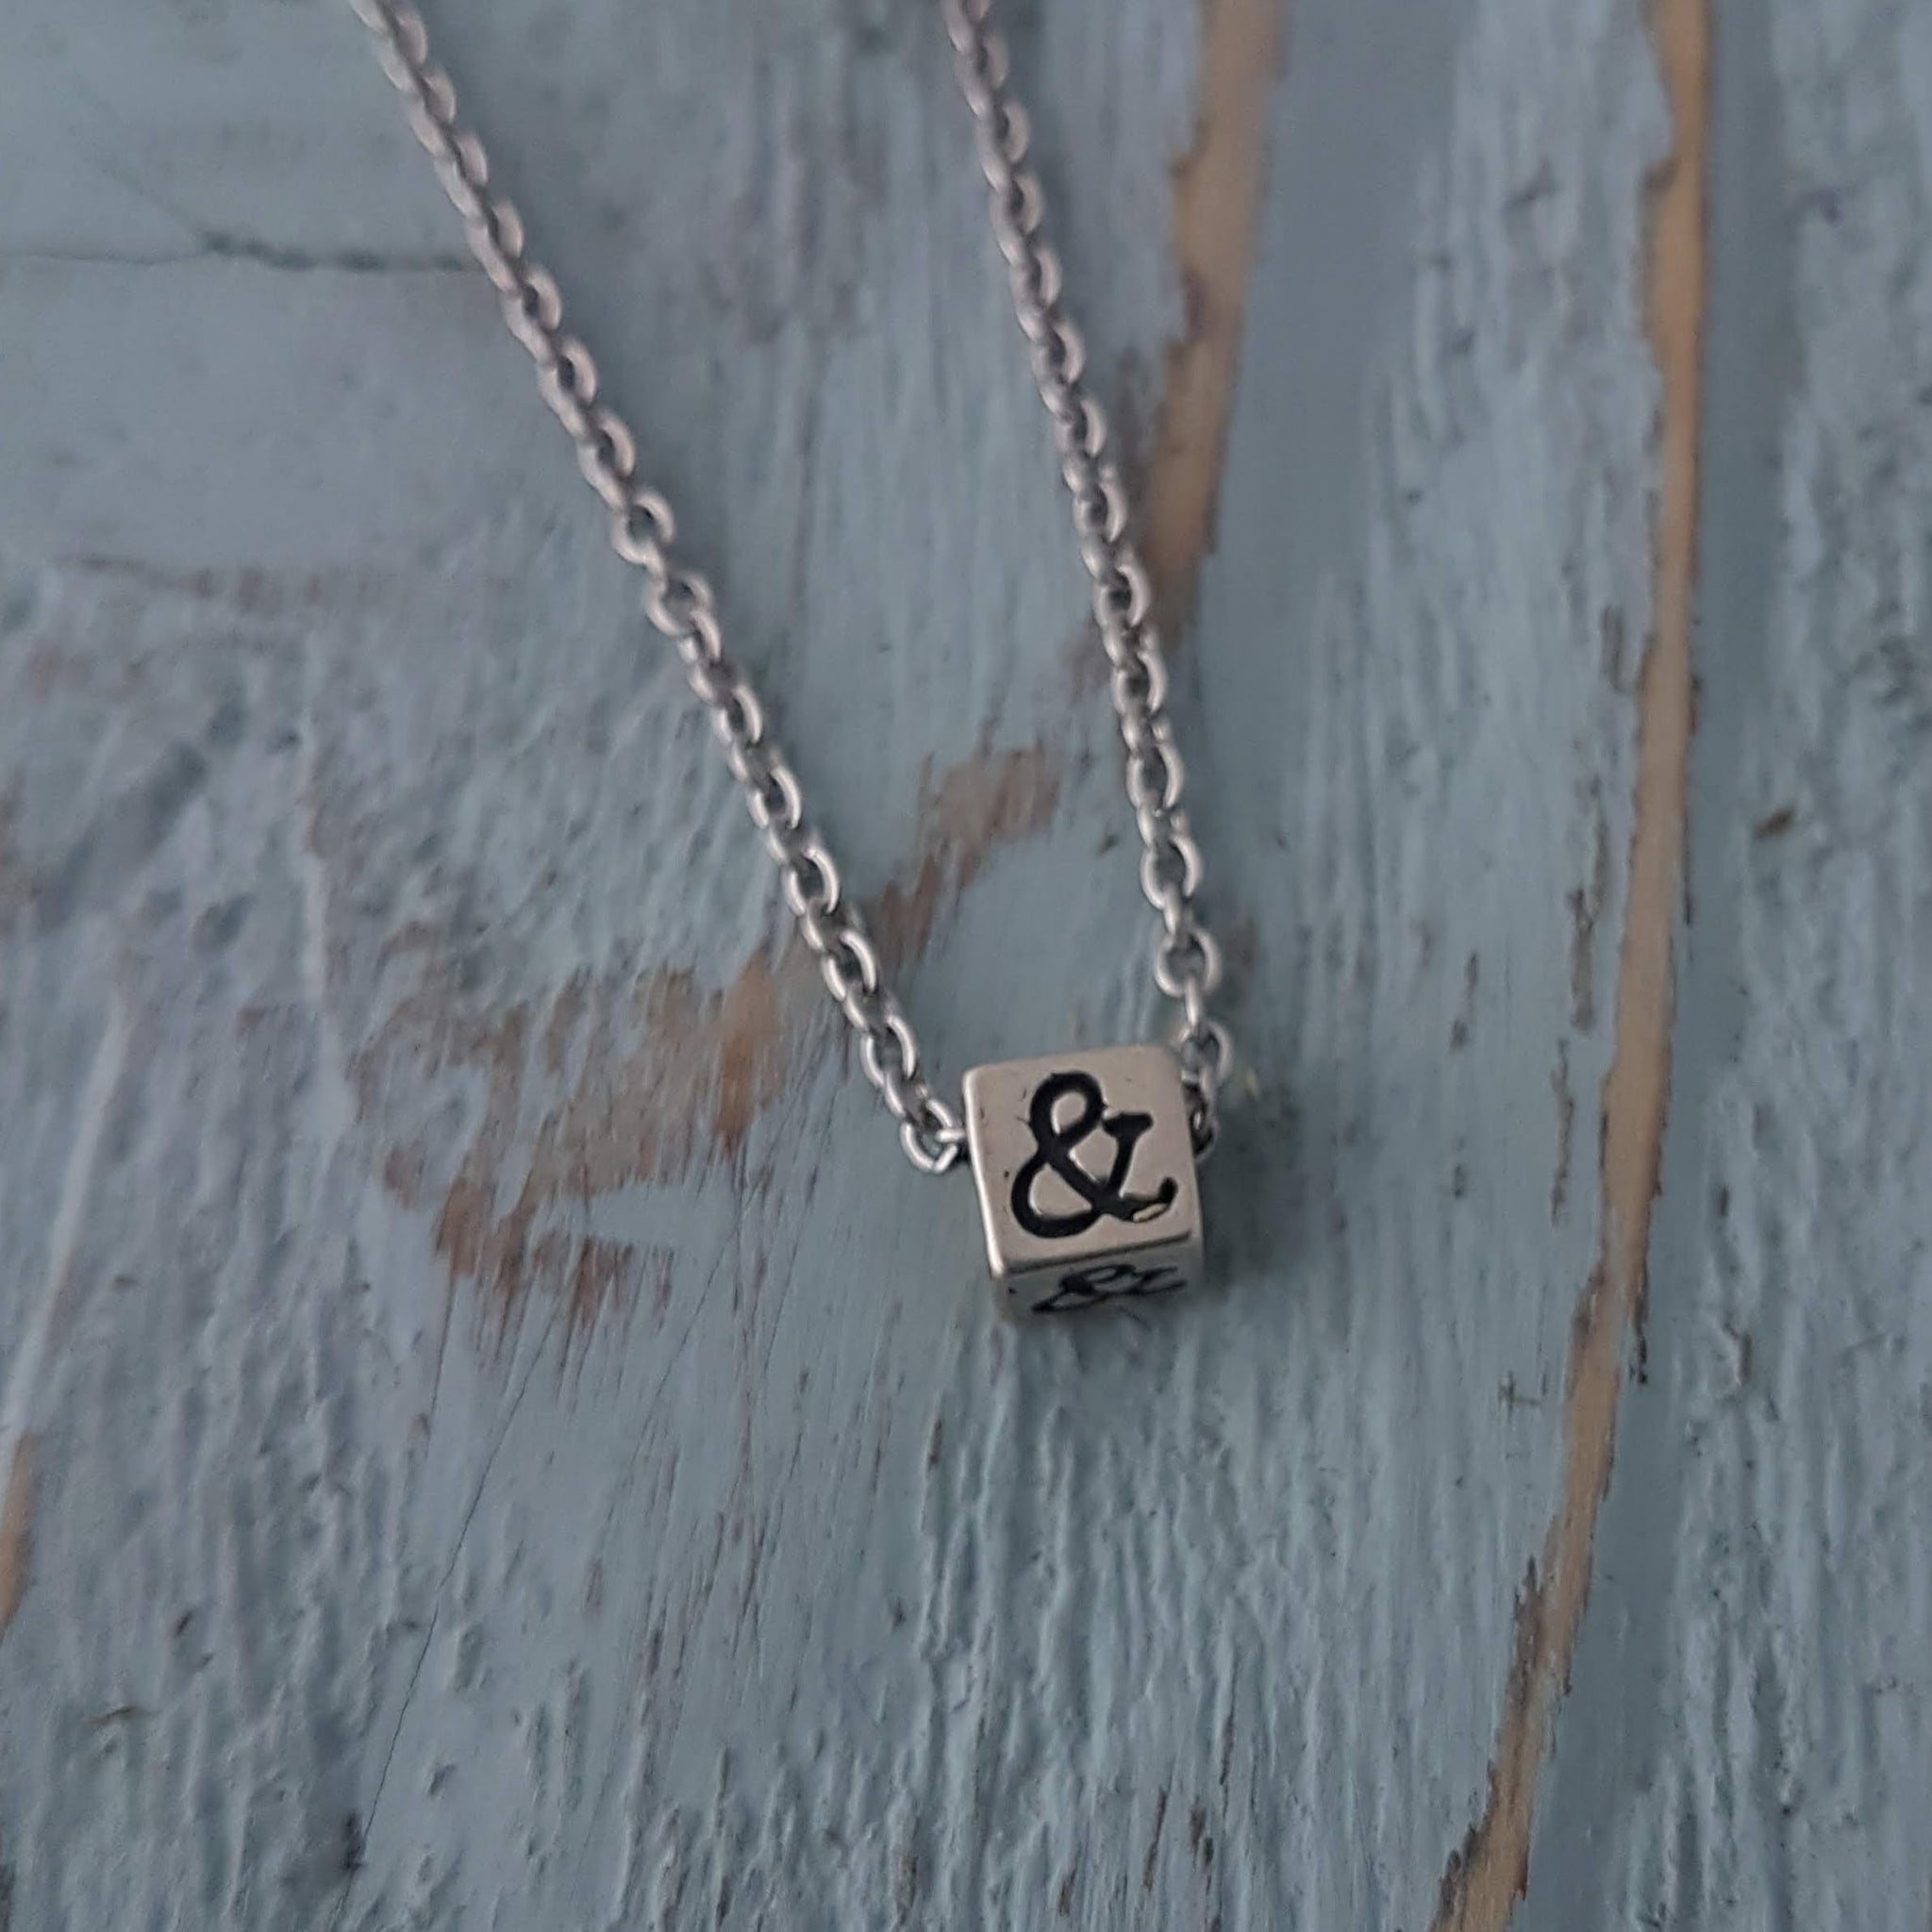 Ampersand Necklace - Gwen Delicious Jewelry Designs